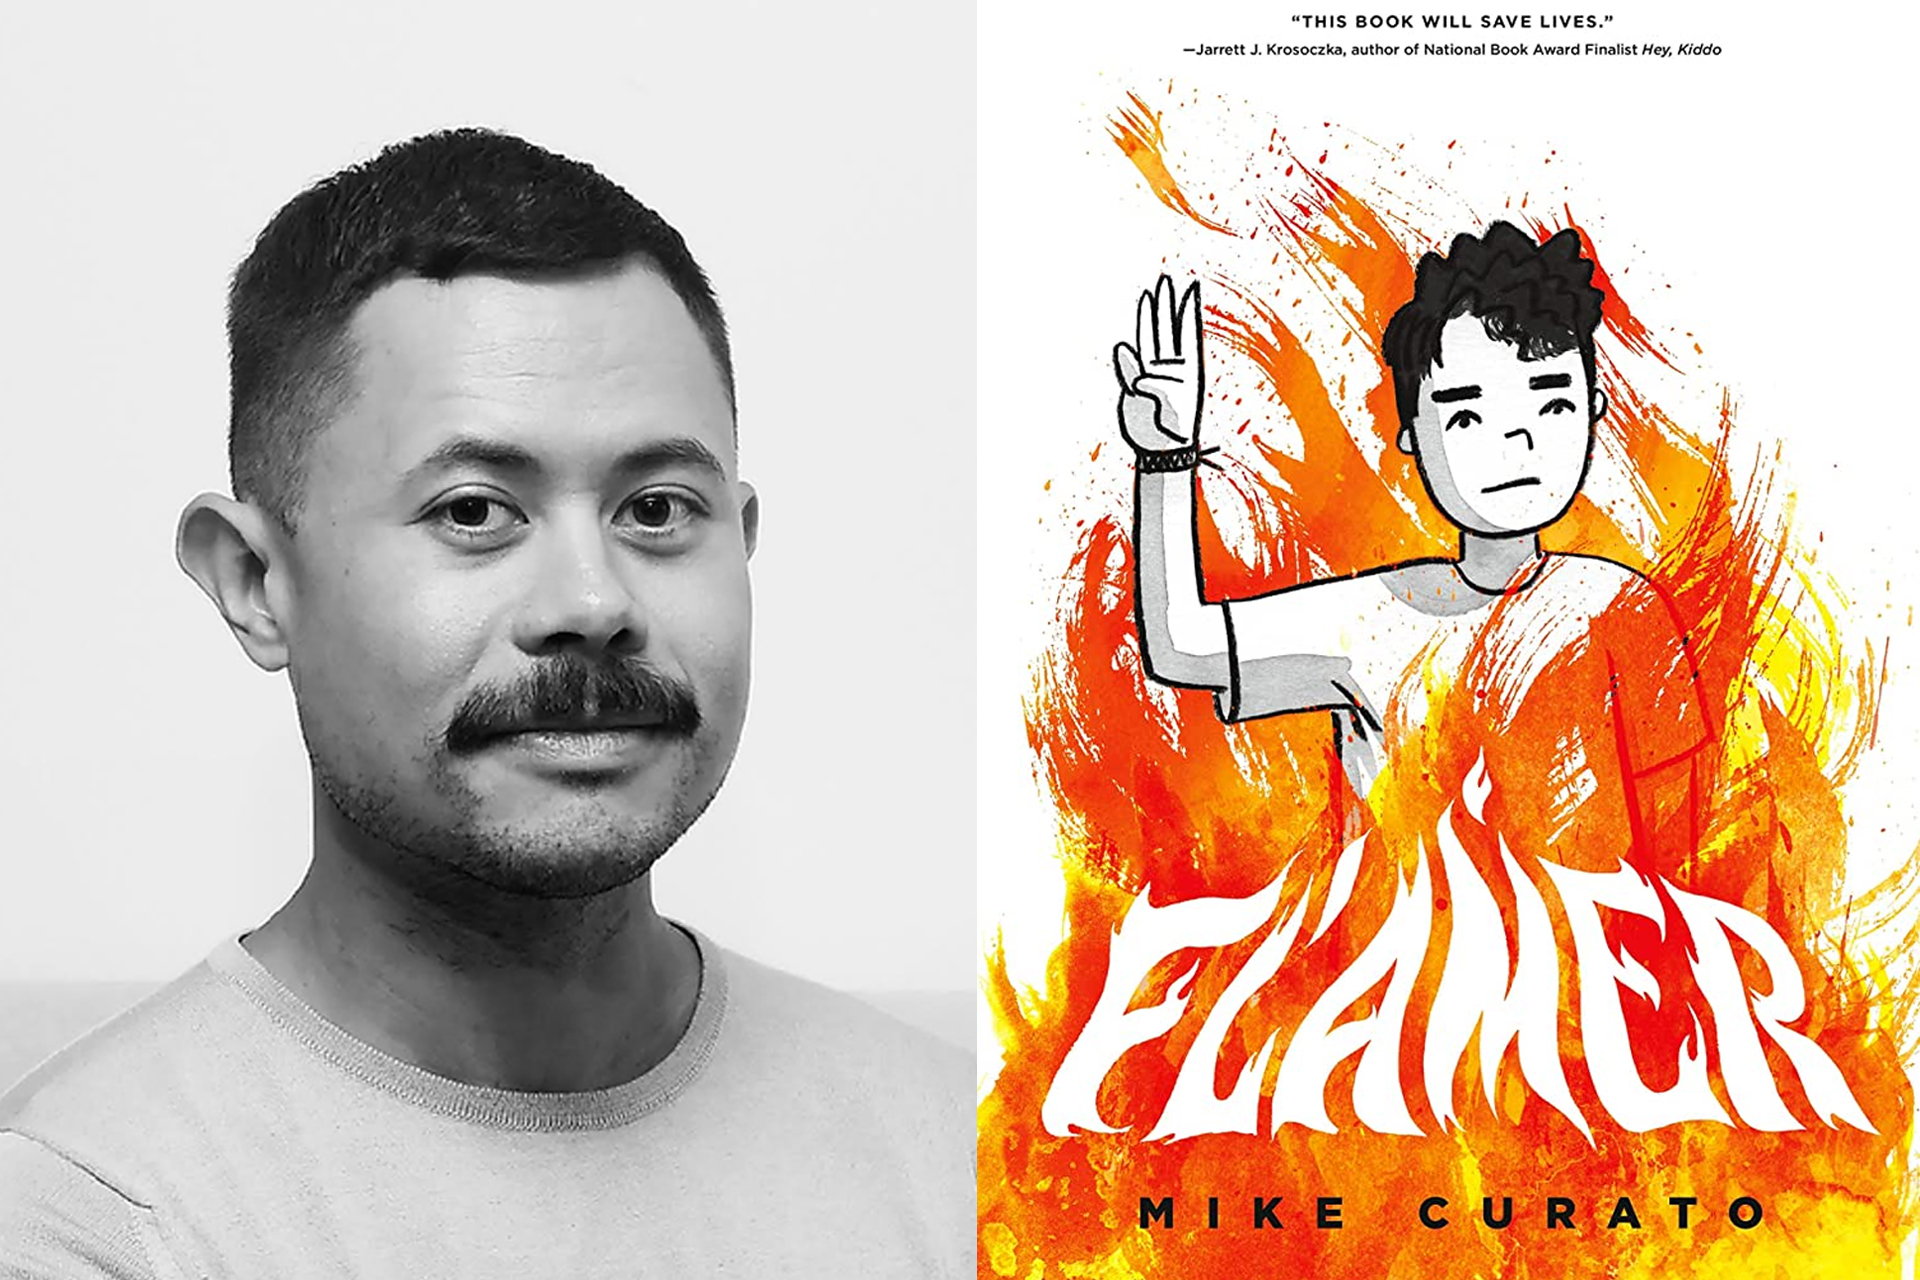 Photo of Mike Curato and cover art for his book, Flamer.